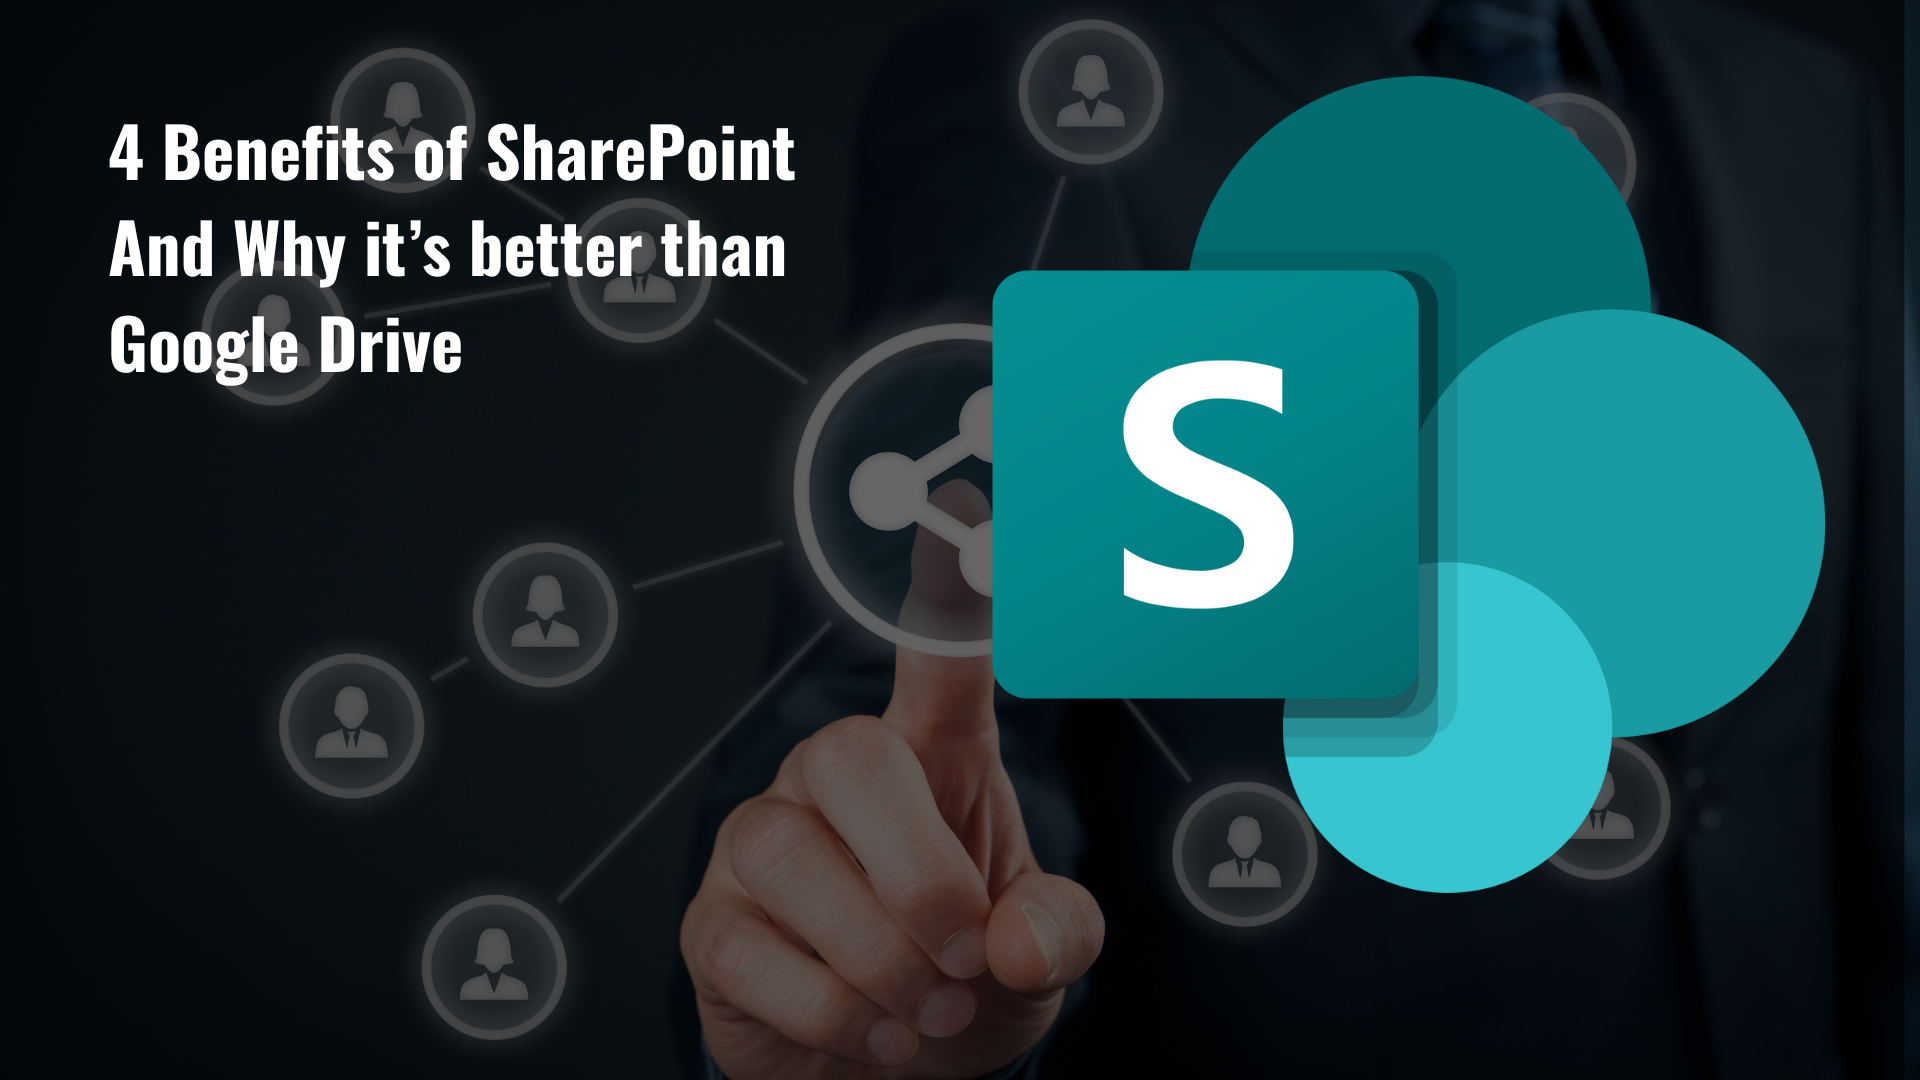 4 Benefits of SharePoint And Why it’s better than Google Drive